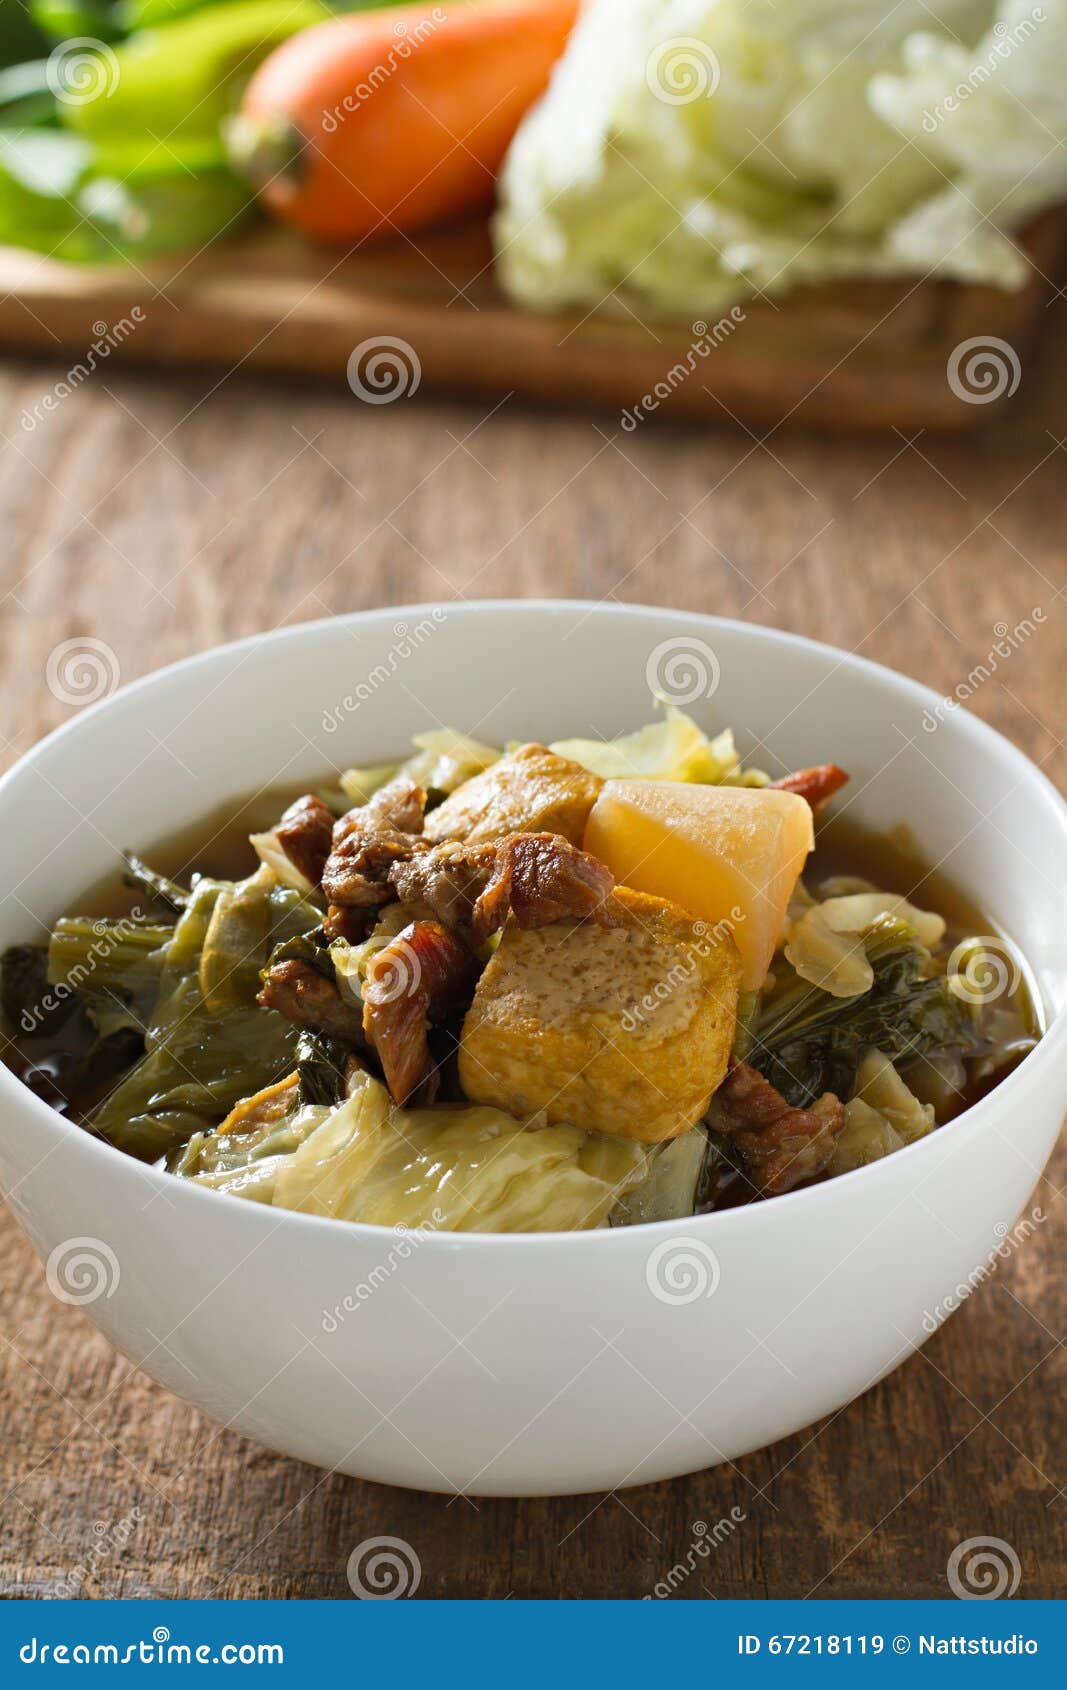 chinese vegetable stew. mixed of vegetables, tofu and pork on wooden background. chinese style.(tom jab chai).